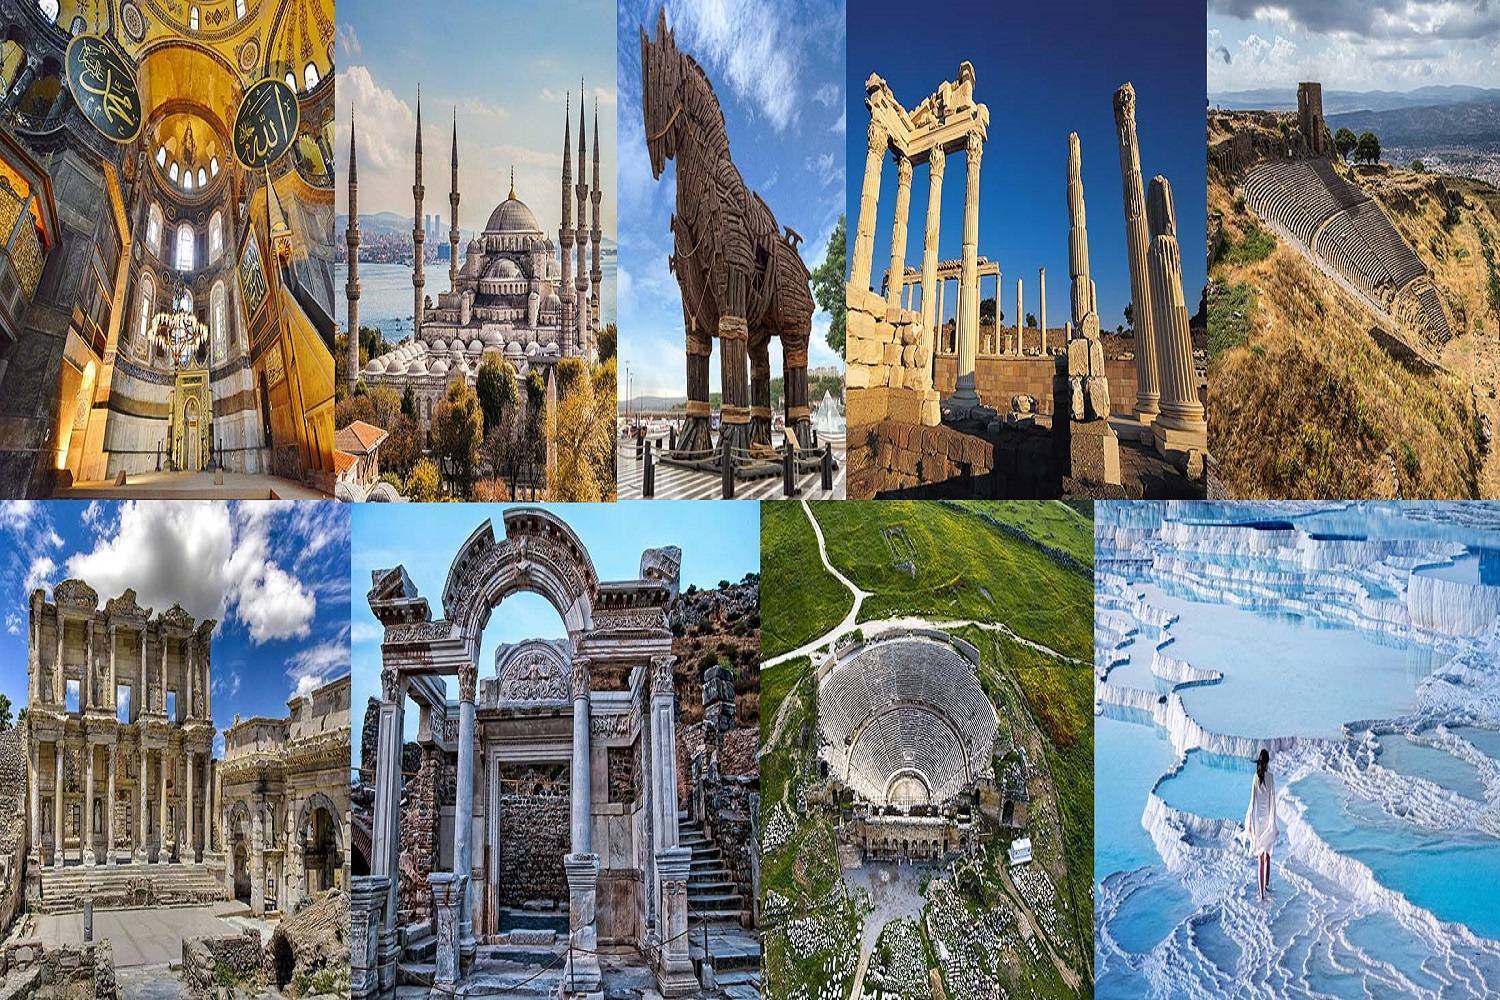 The best museums in Turkey you have to include on your Turkey itinerary